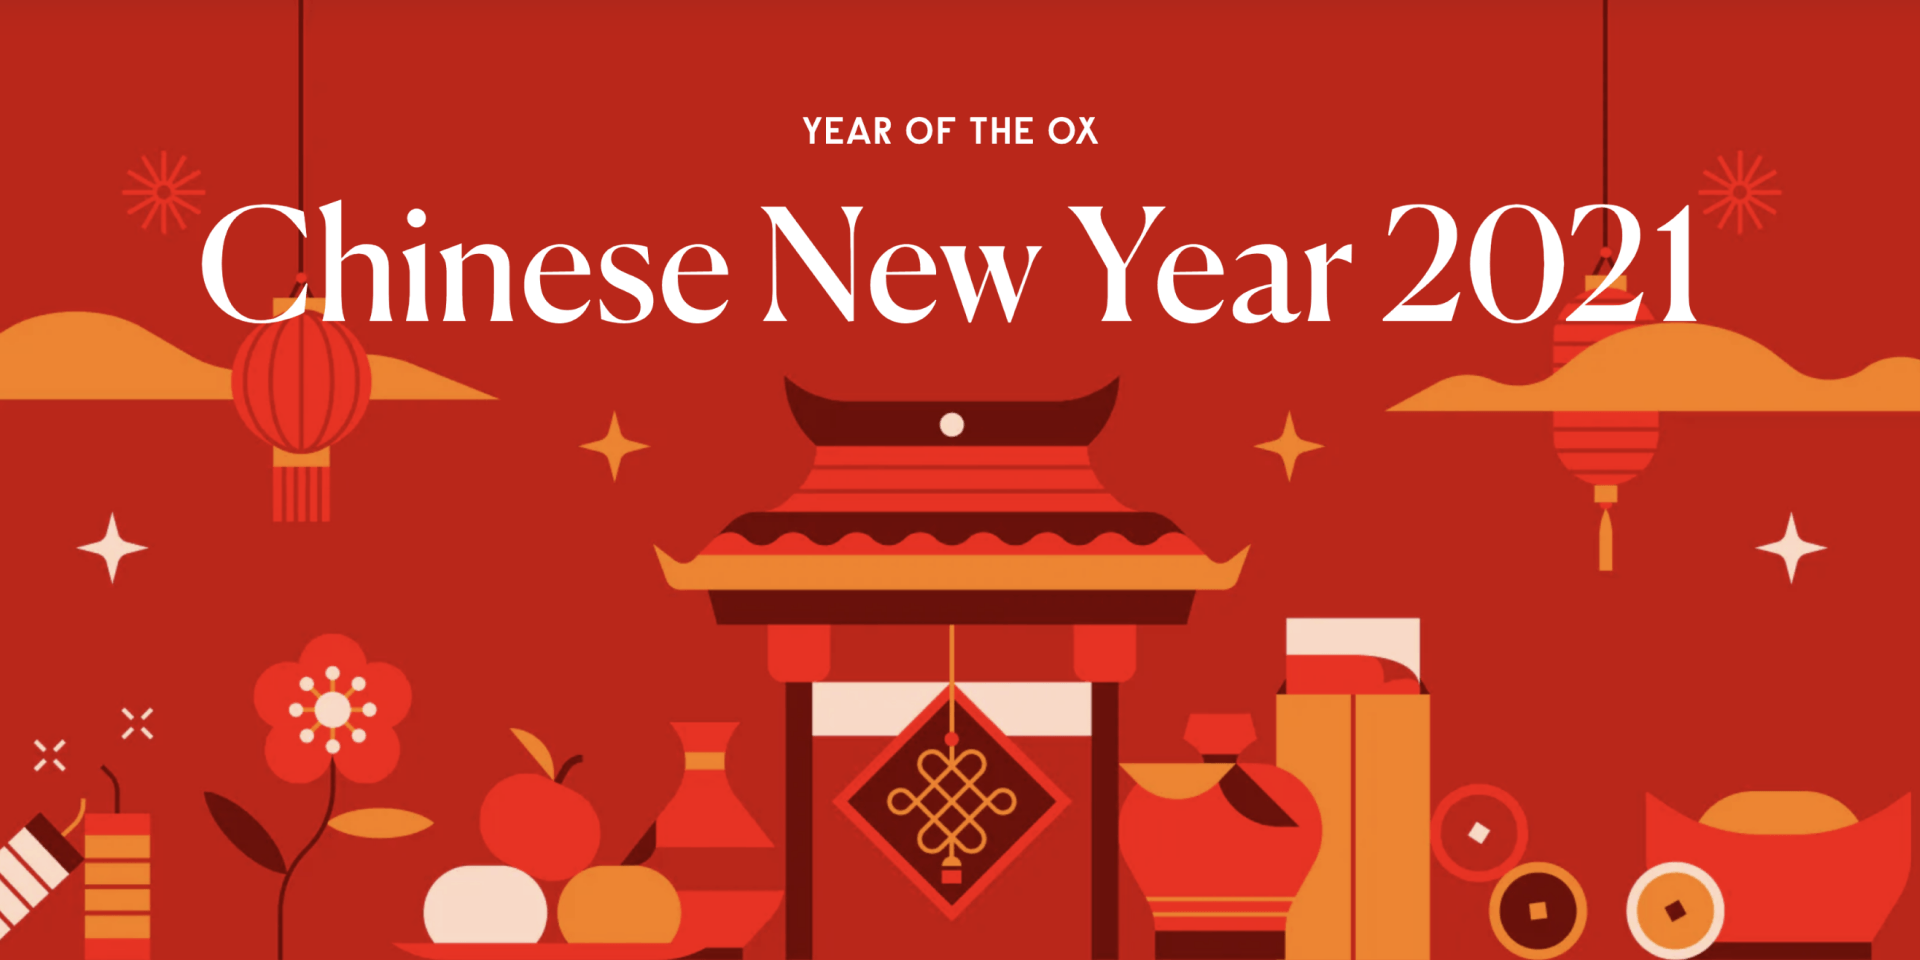 wishes for lunar new year 2021